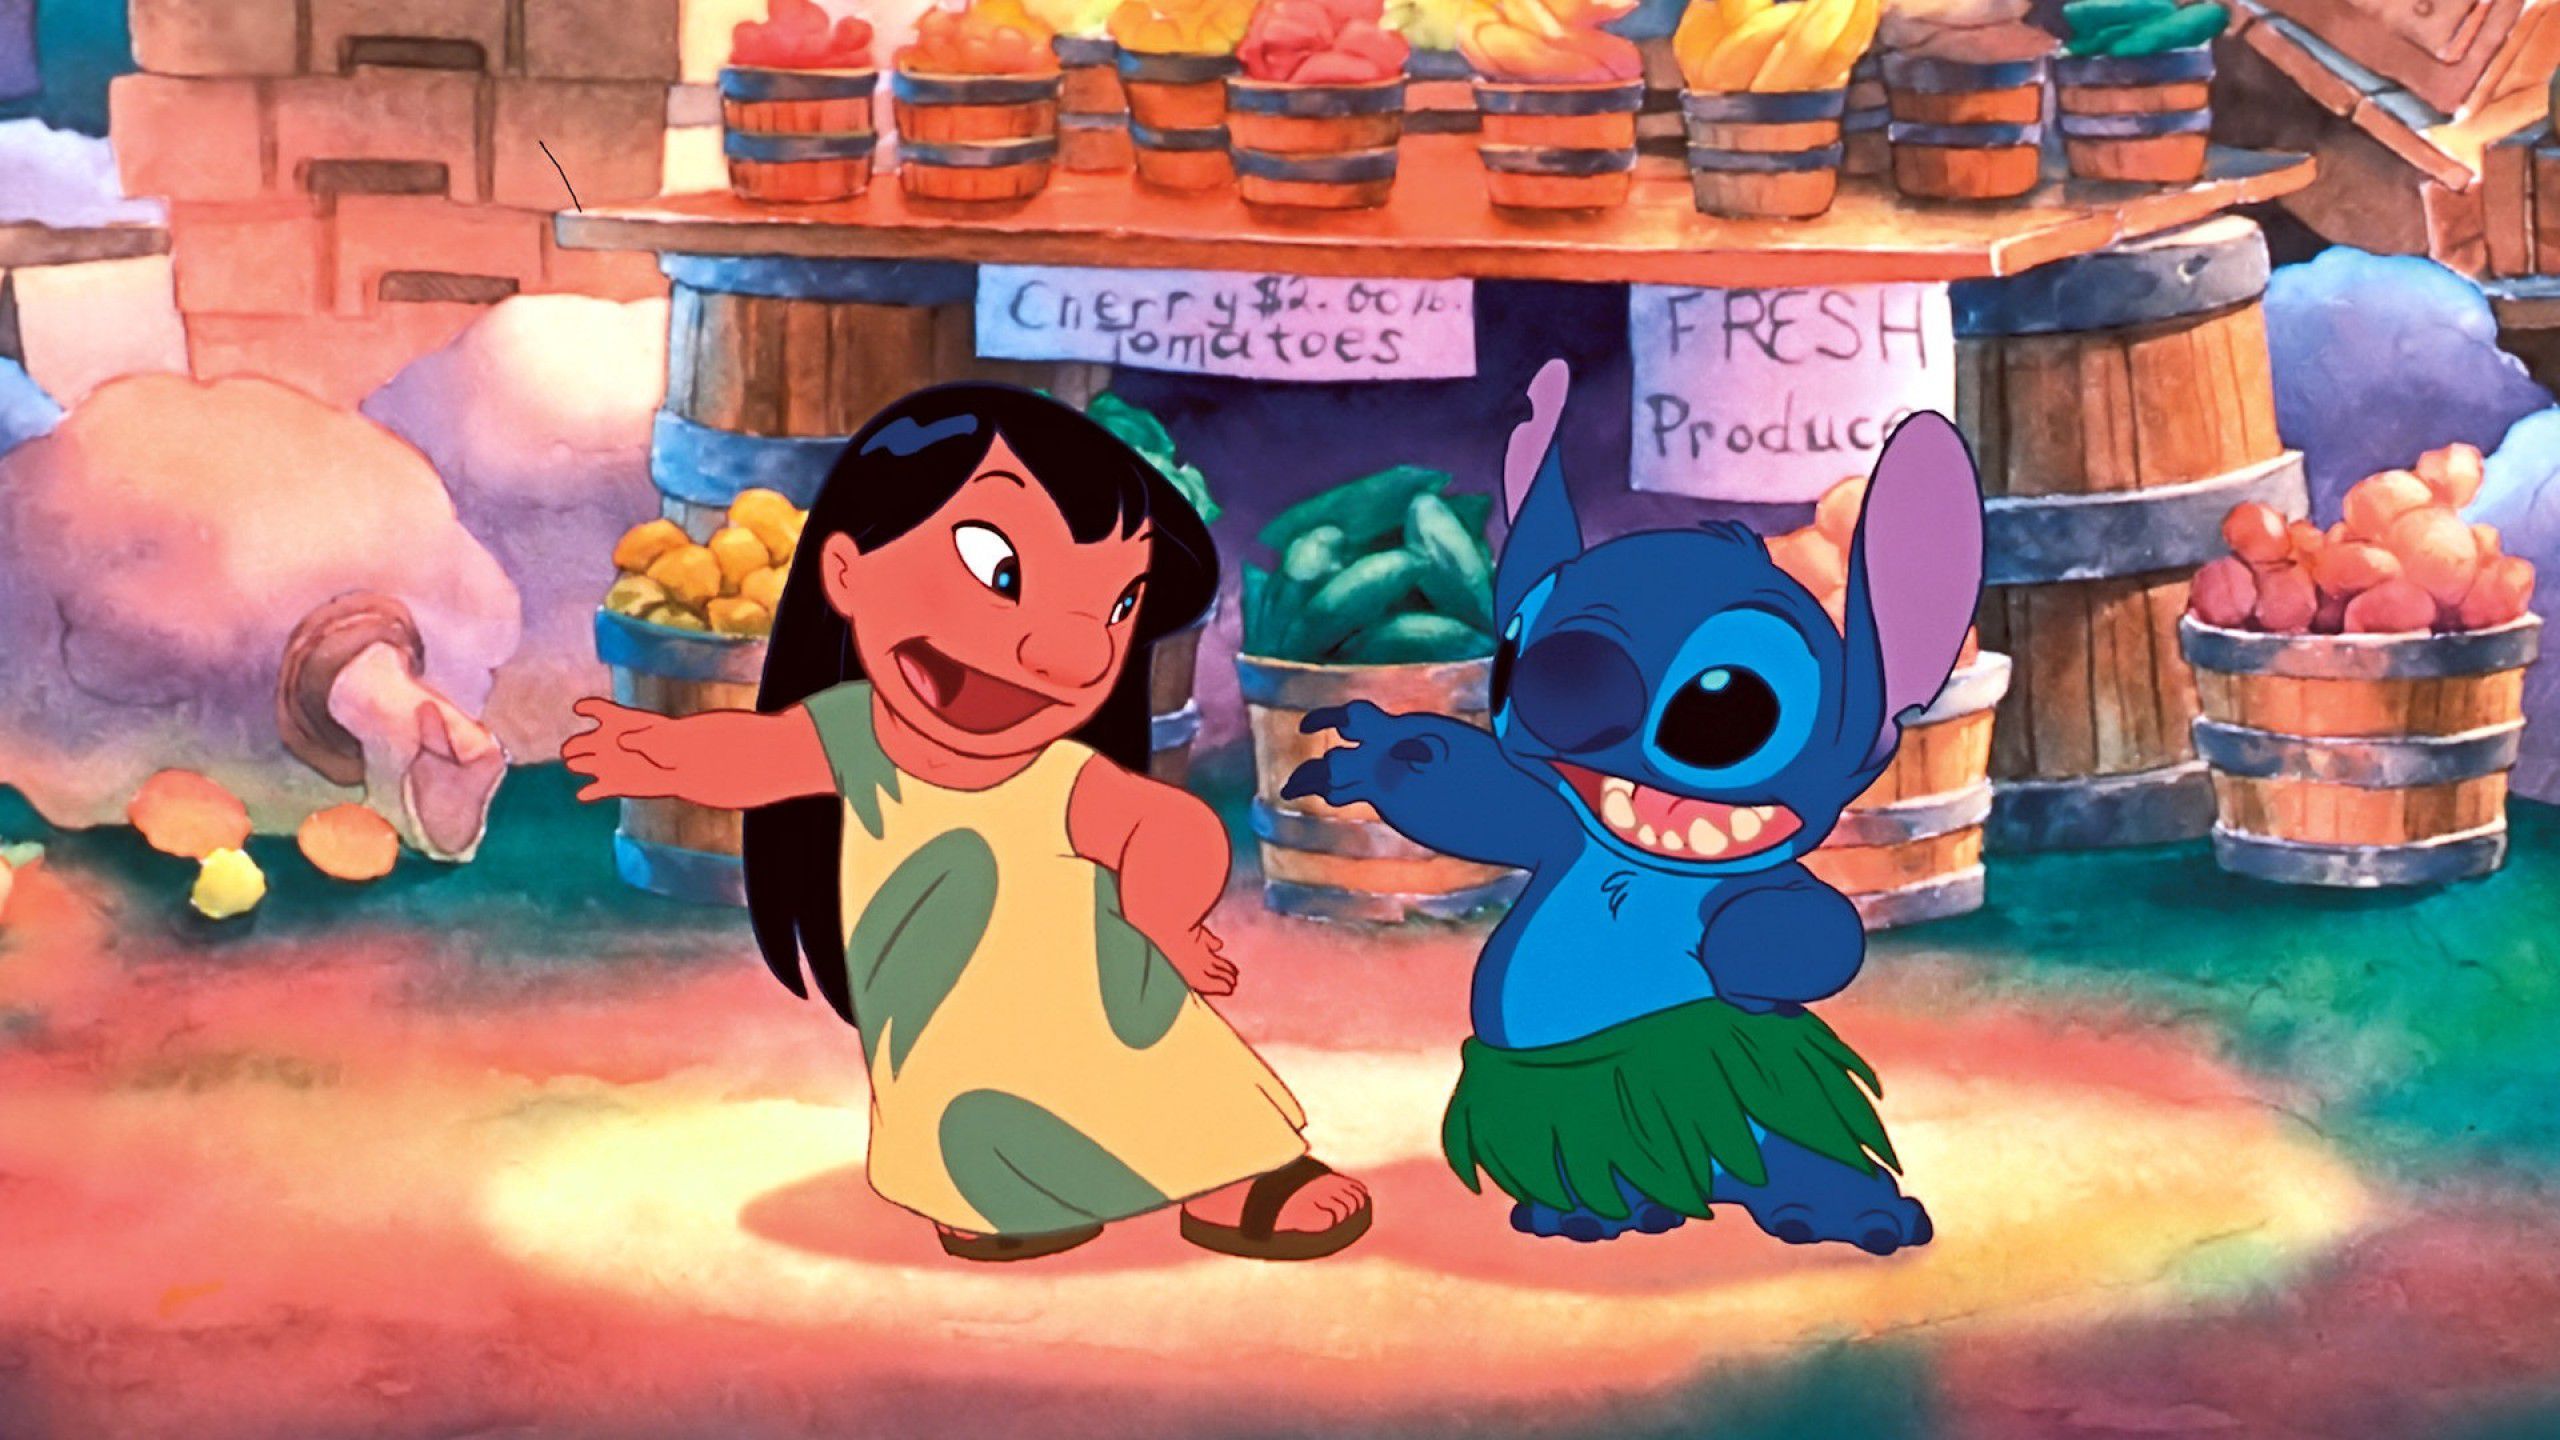 HD wallpaper, And, Lilo, Stitch, Wallpapers